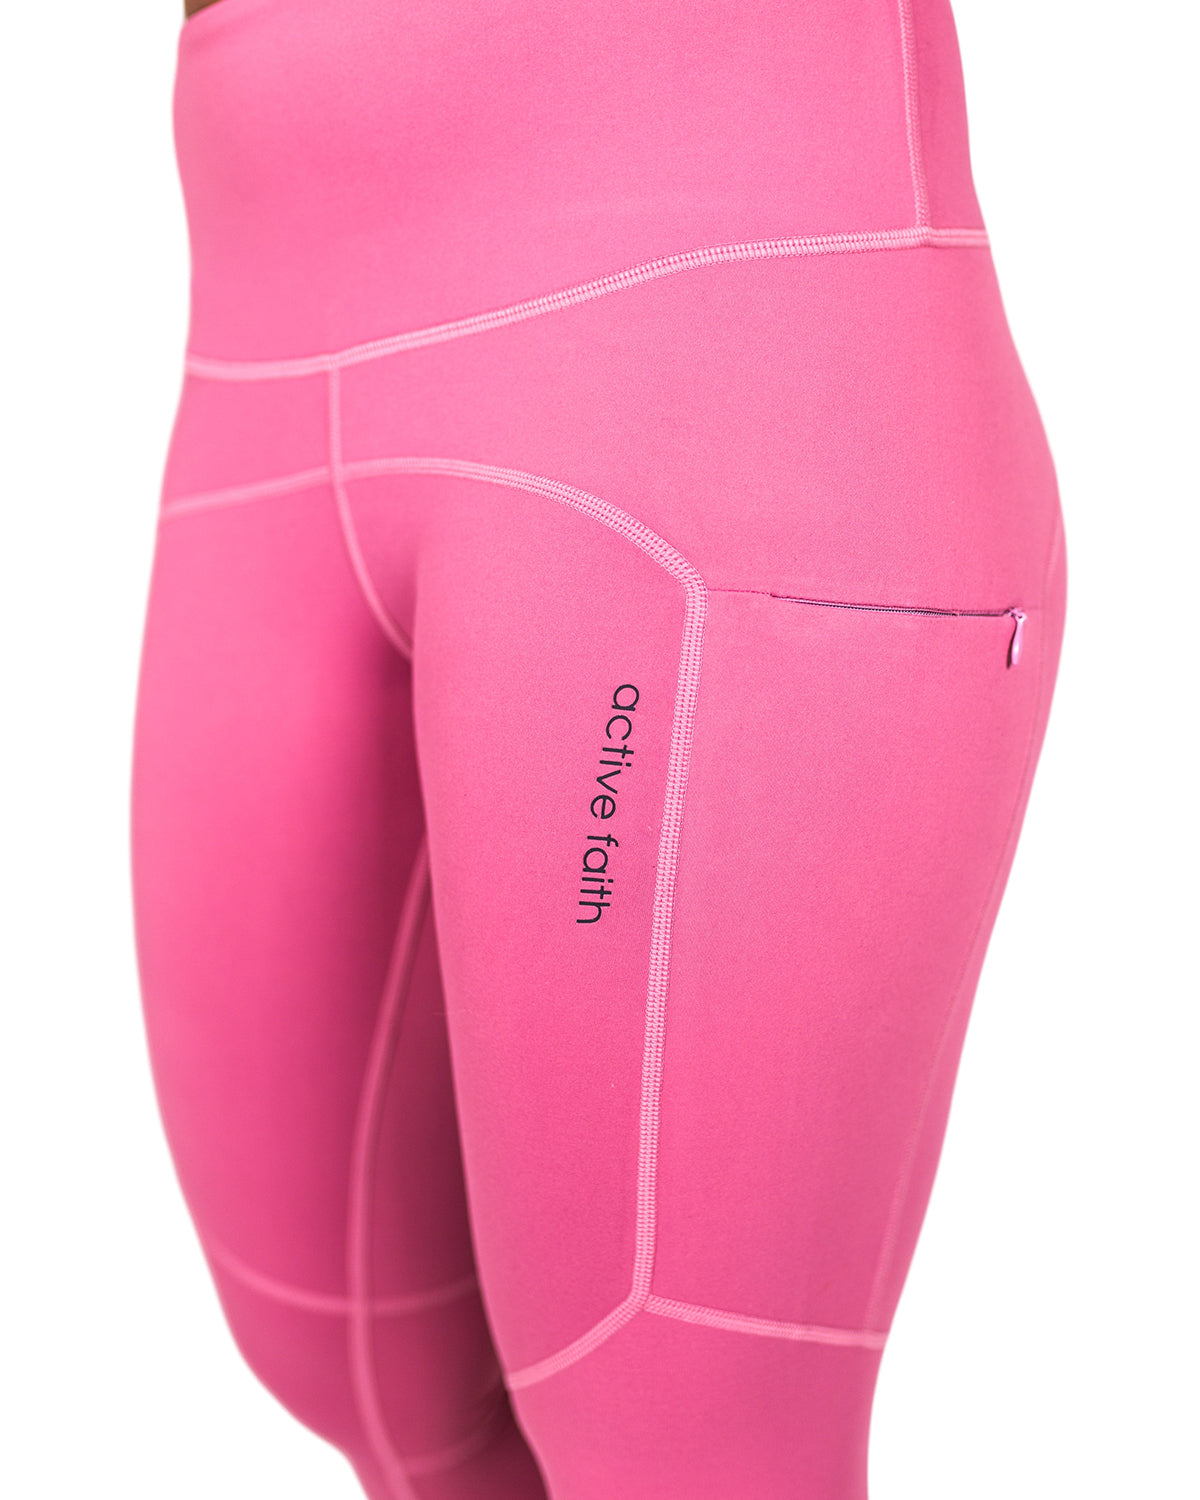 Epic Luxe Running Tights for Women, Salmon